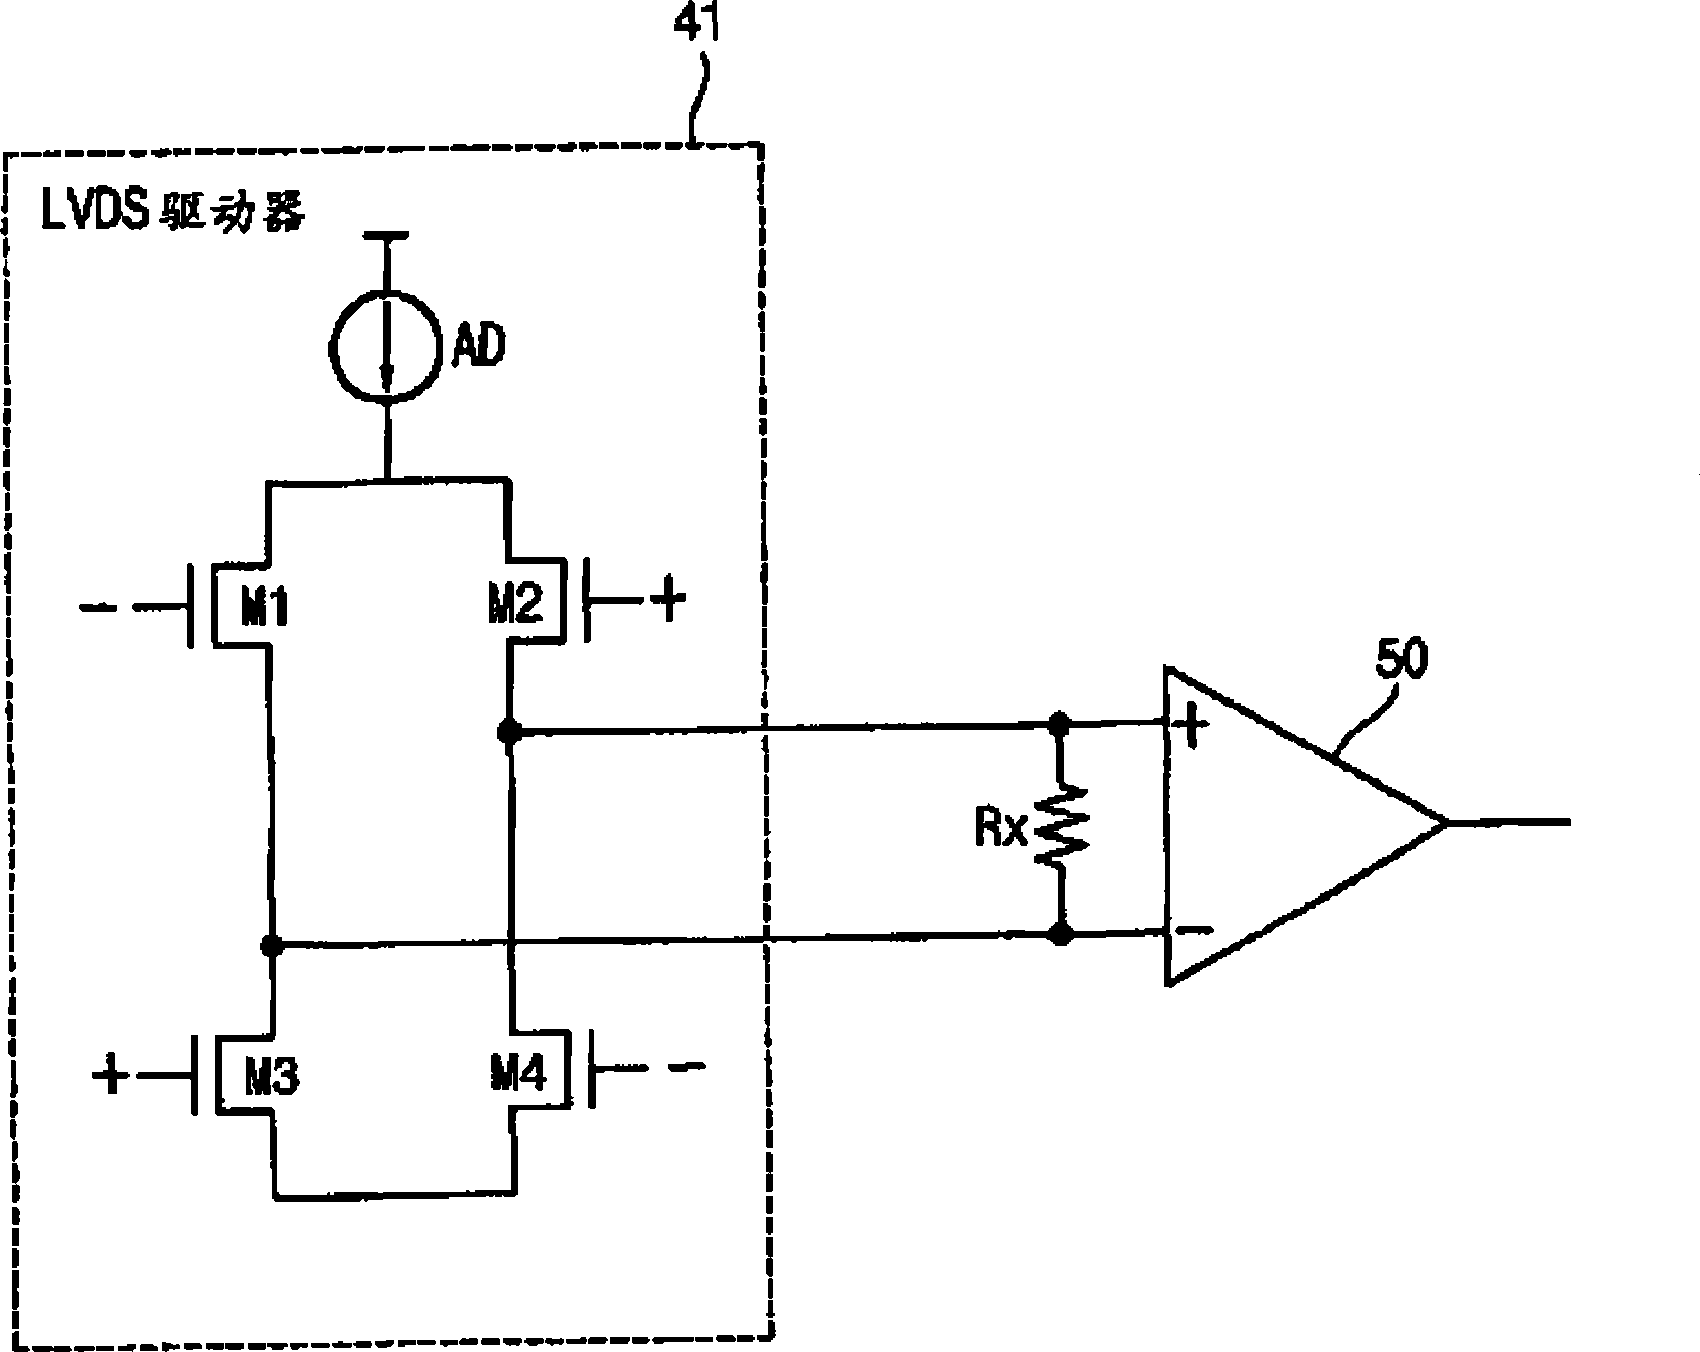 Pre-loading device and low voltage differential signal transmitter